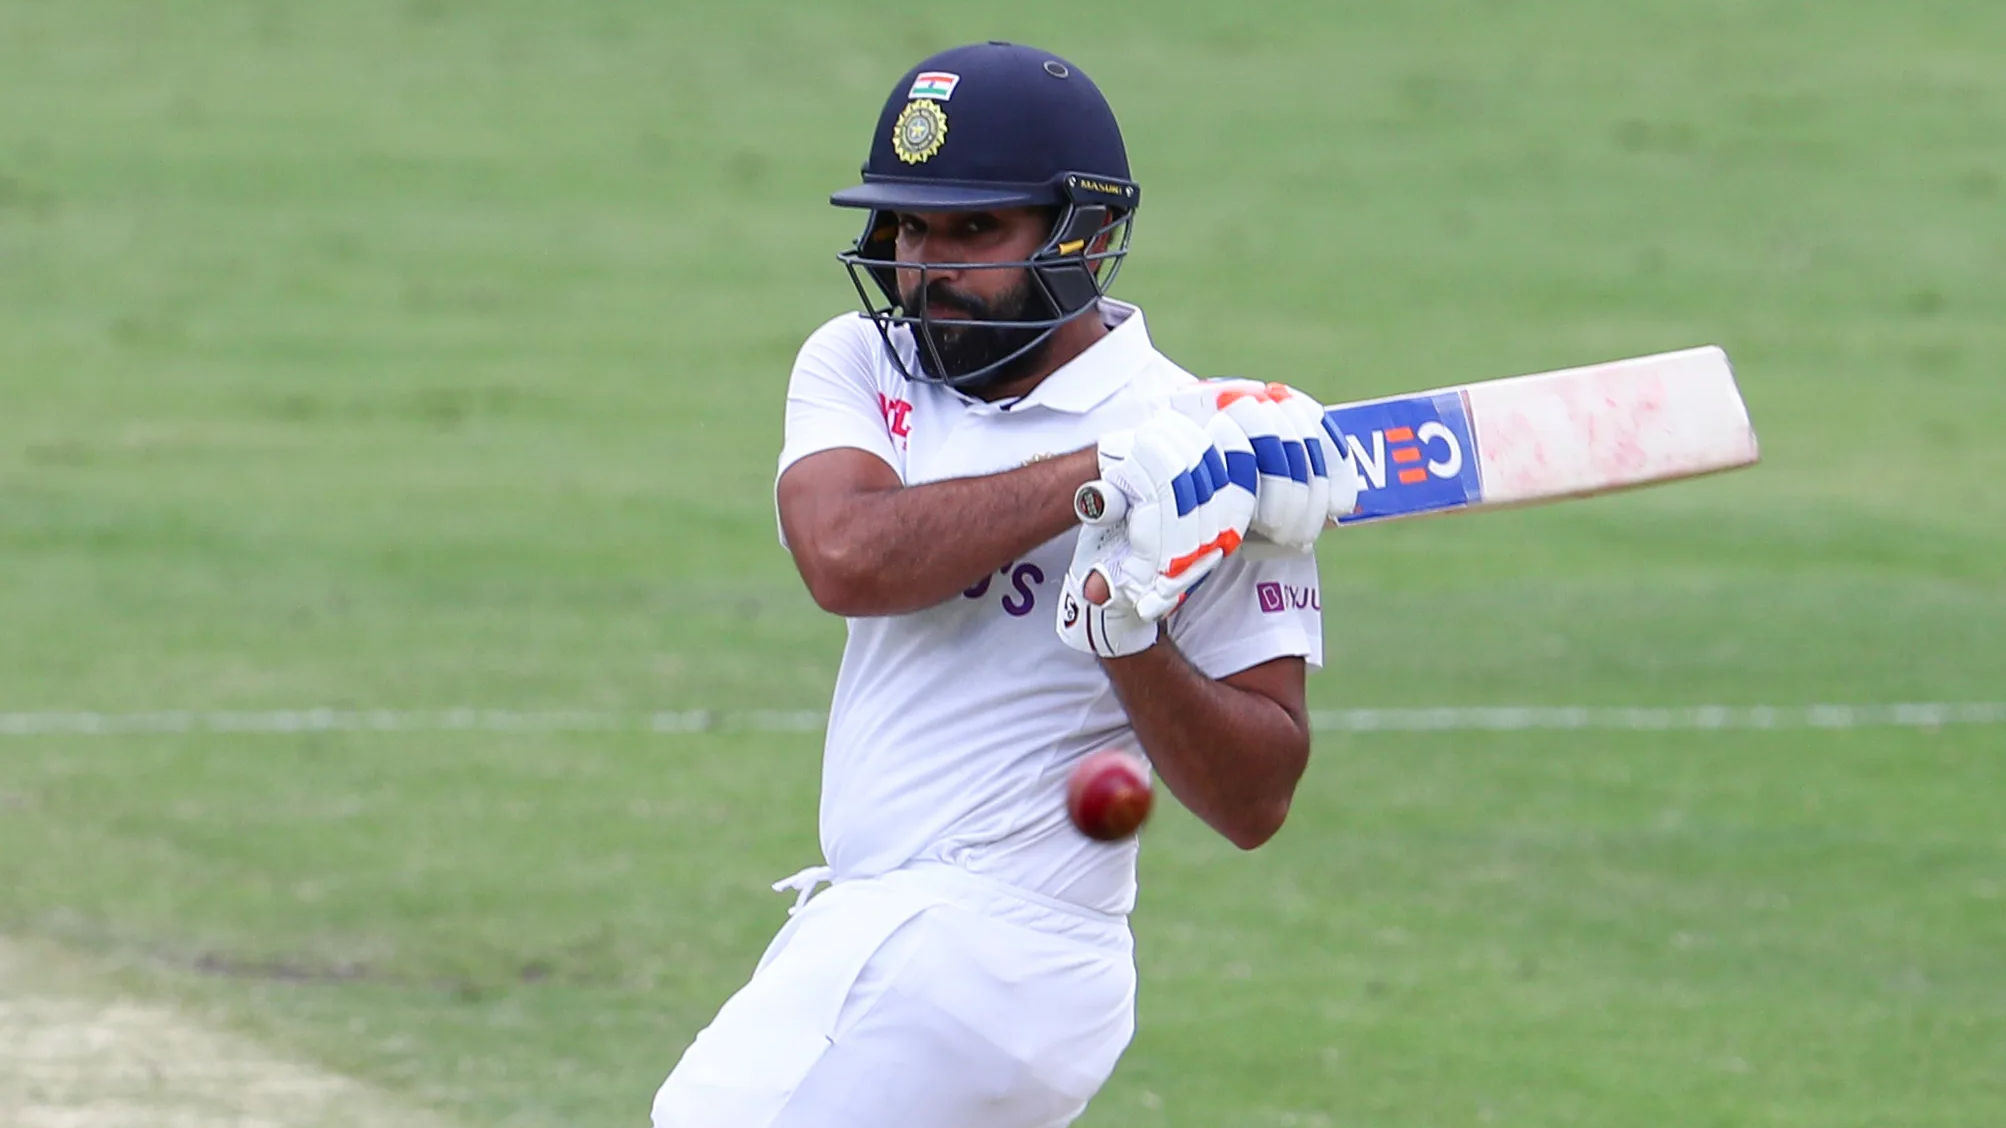 Ind vs Eng: Rohit Sharma brings up his 7th Test hundred